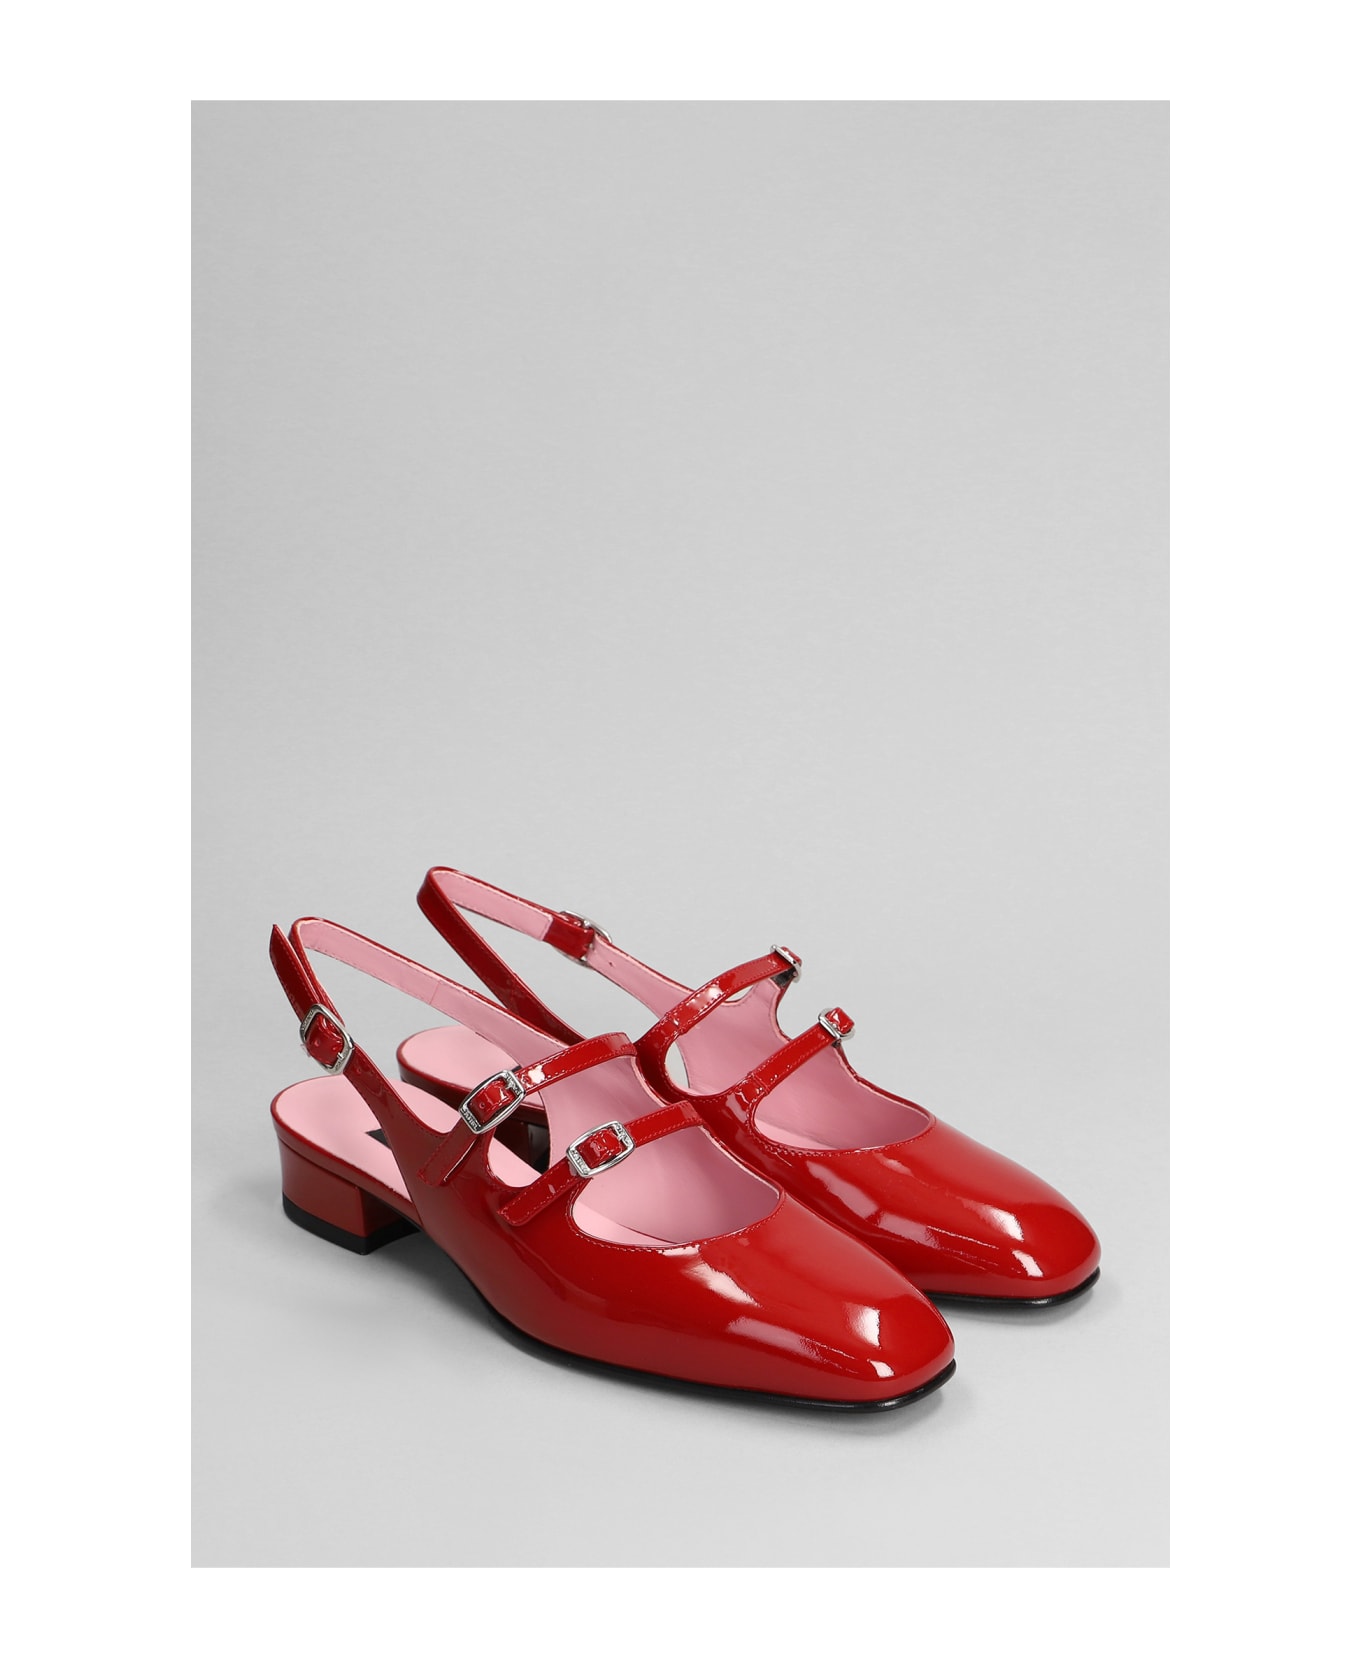 Carel Peche Pumps In Red Patent Leather - red